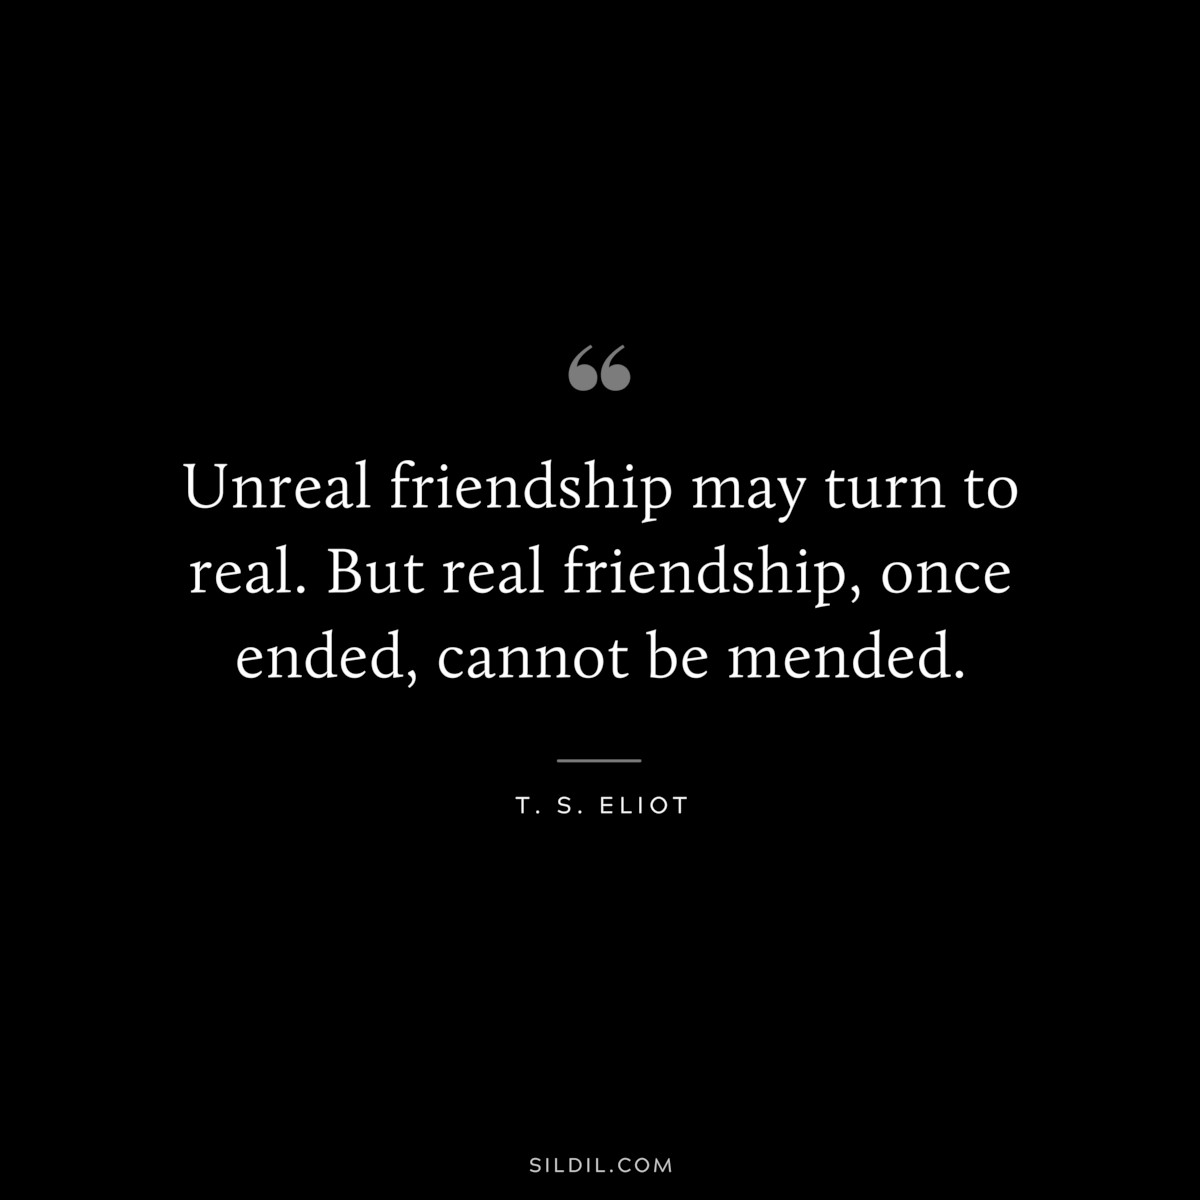 Unreal friendship may turn to real. But real friendship, once ended, cannot be mended. ― T. S. Eliot